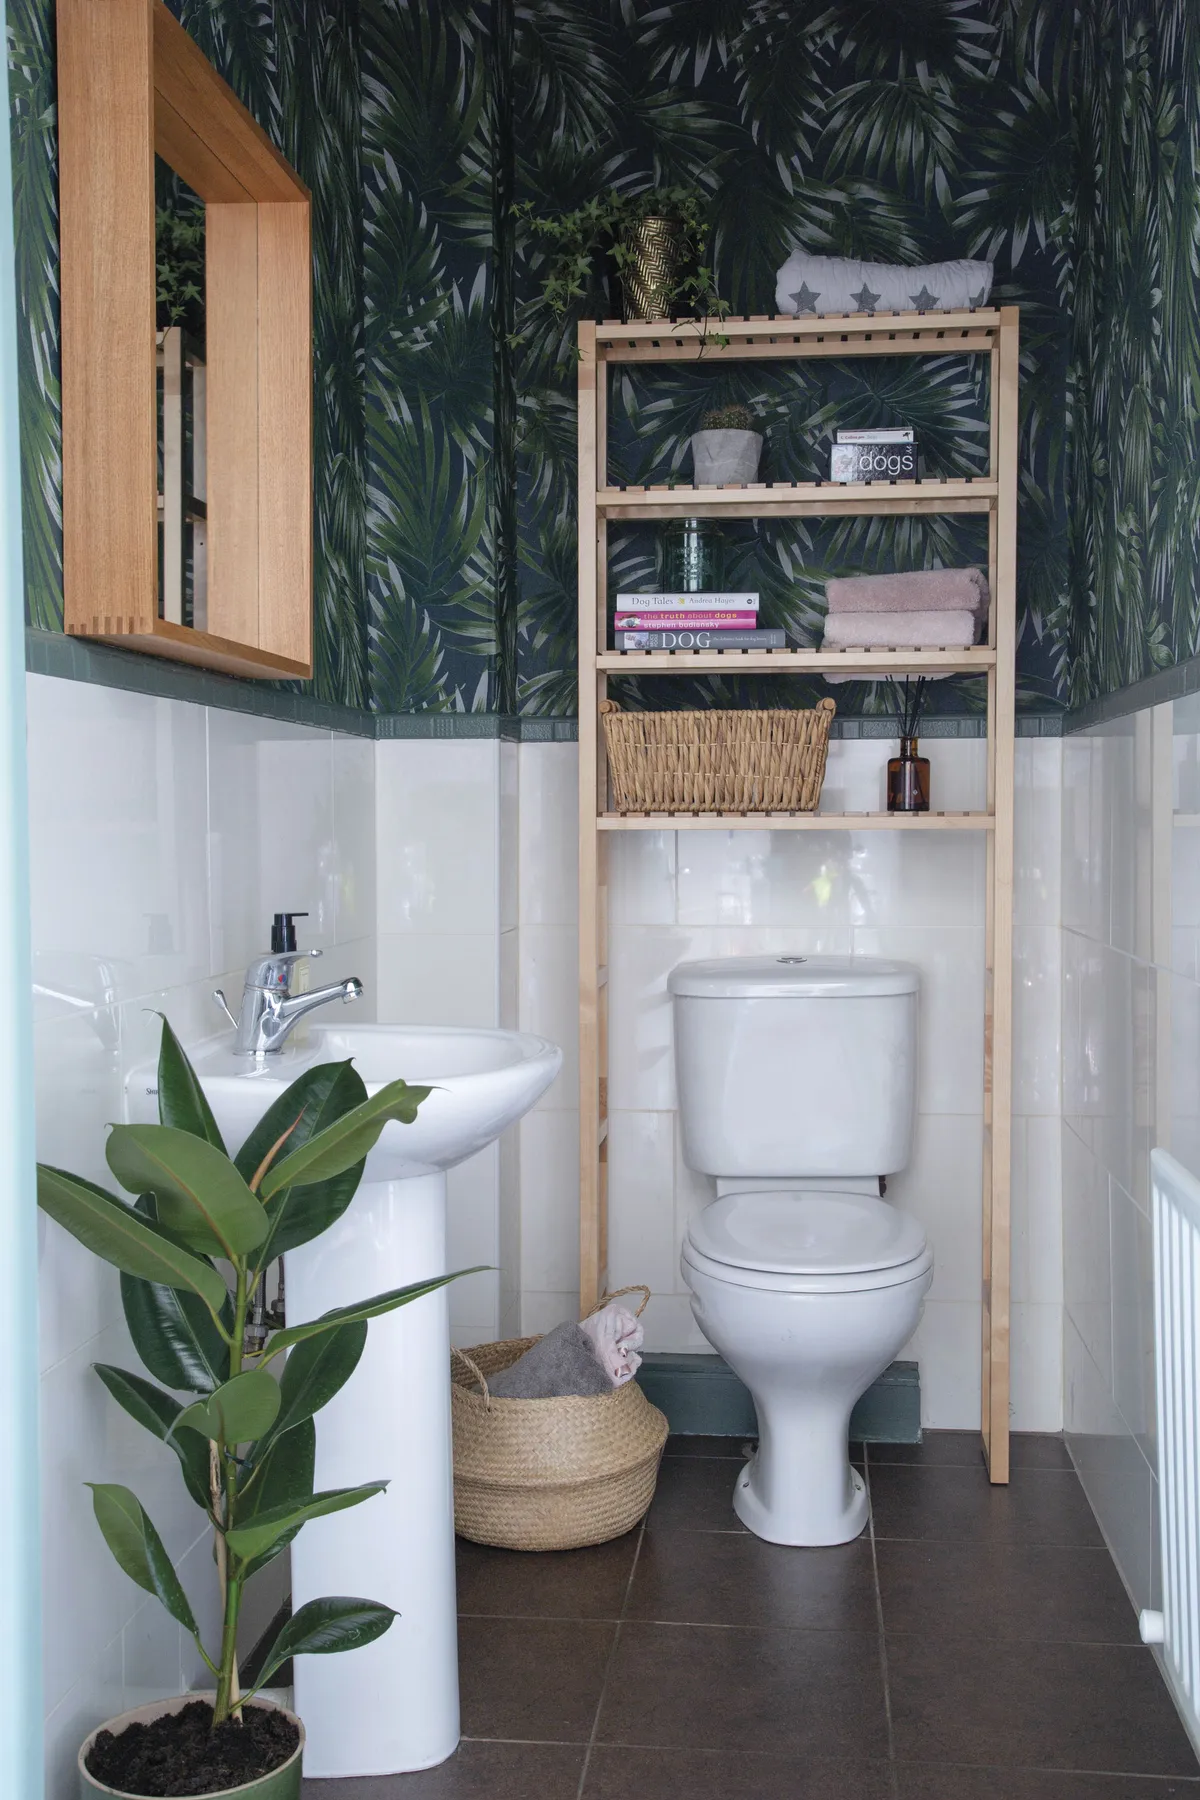 ‘The tiles were original and definitely wouldn’t have been my first choice,’ Elaine reveals. ‘I added the palm print wallpaper and wooden wares in an attempt to tone down the harshness.’